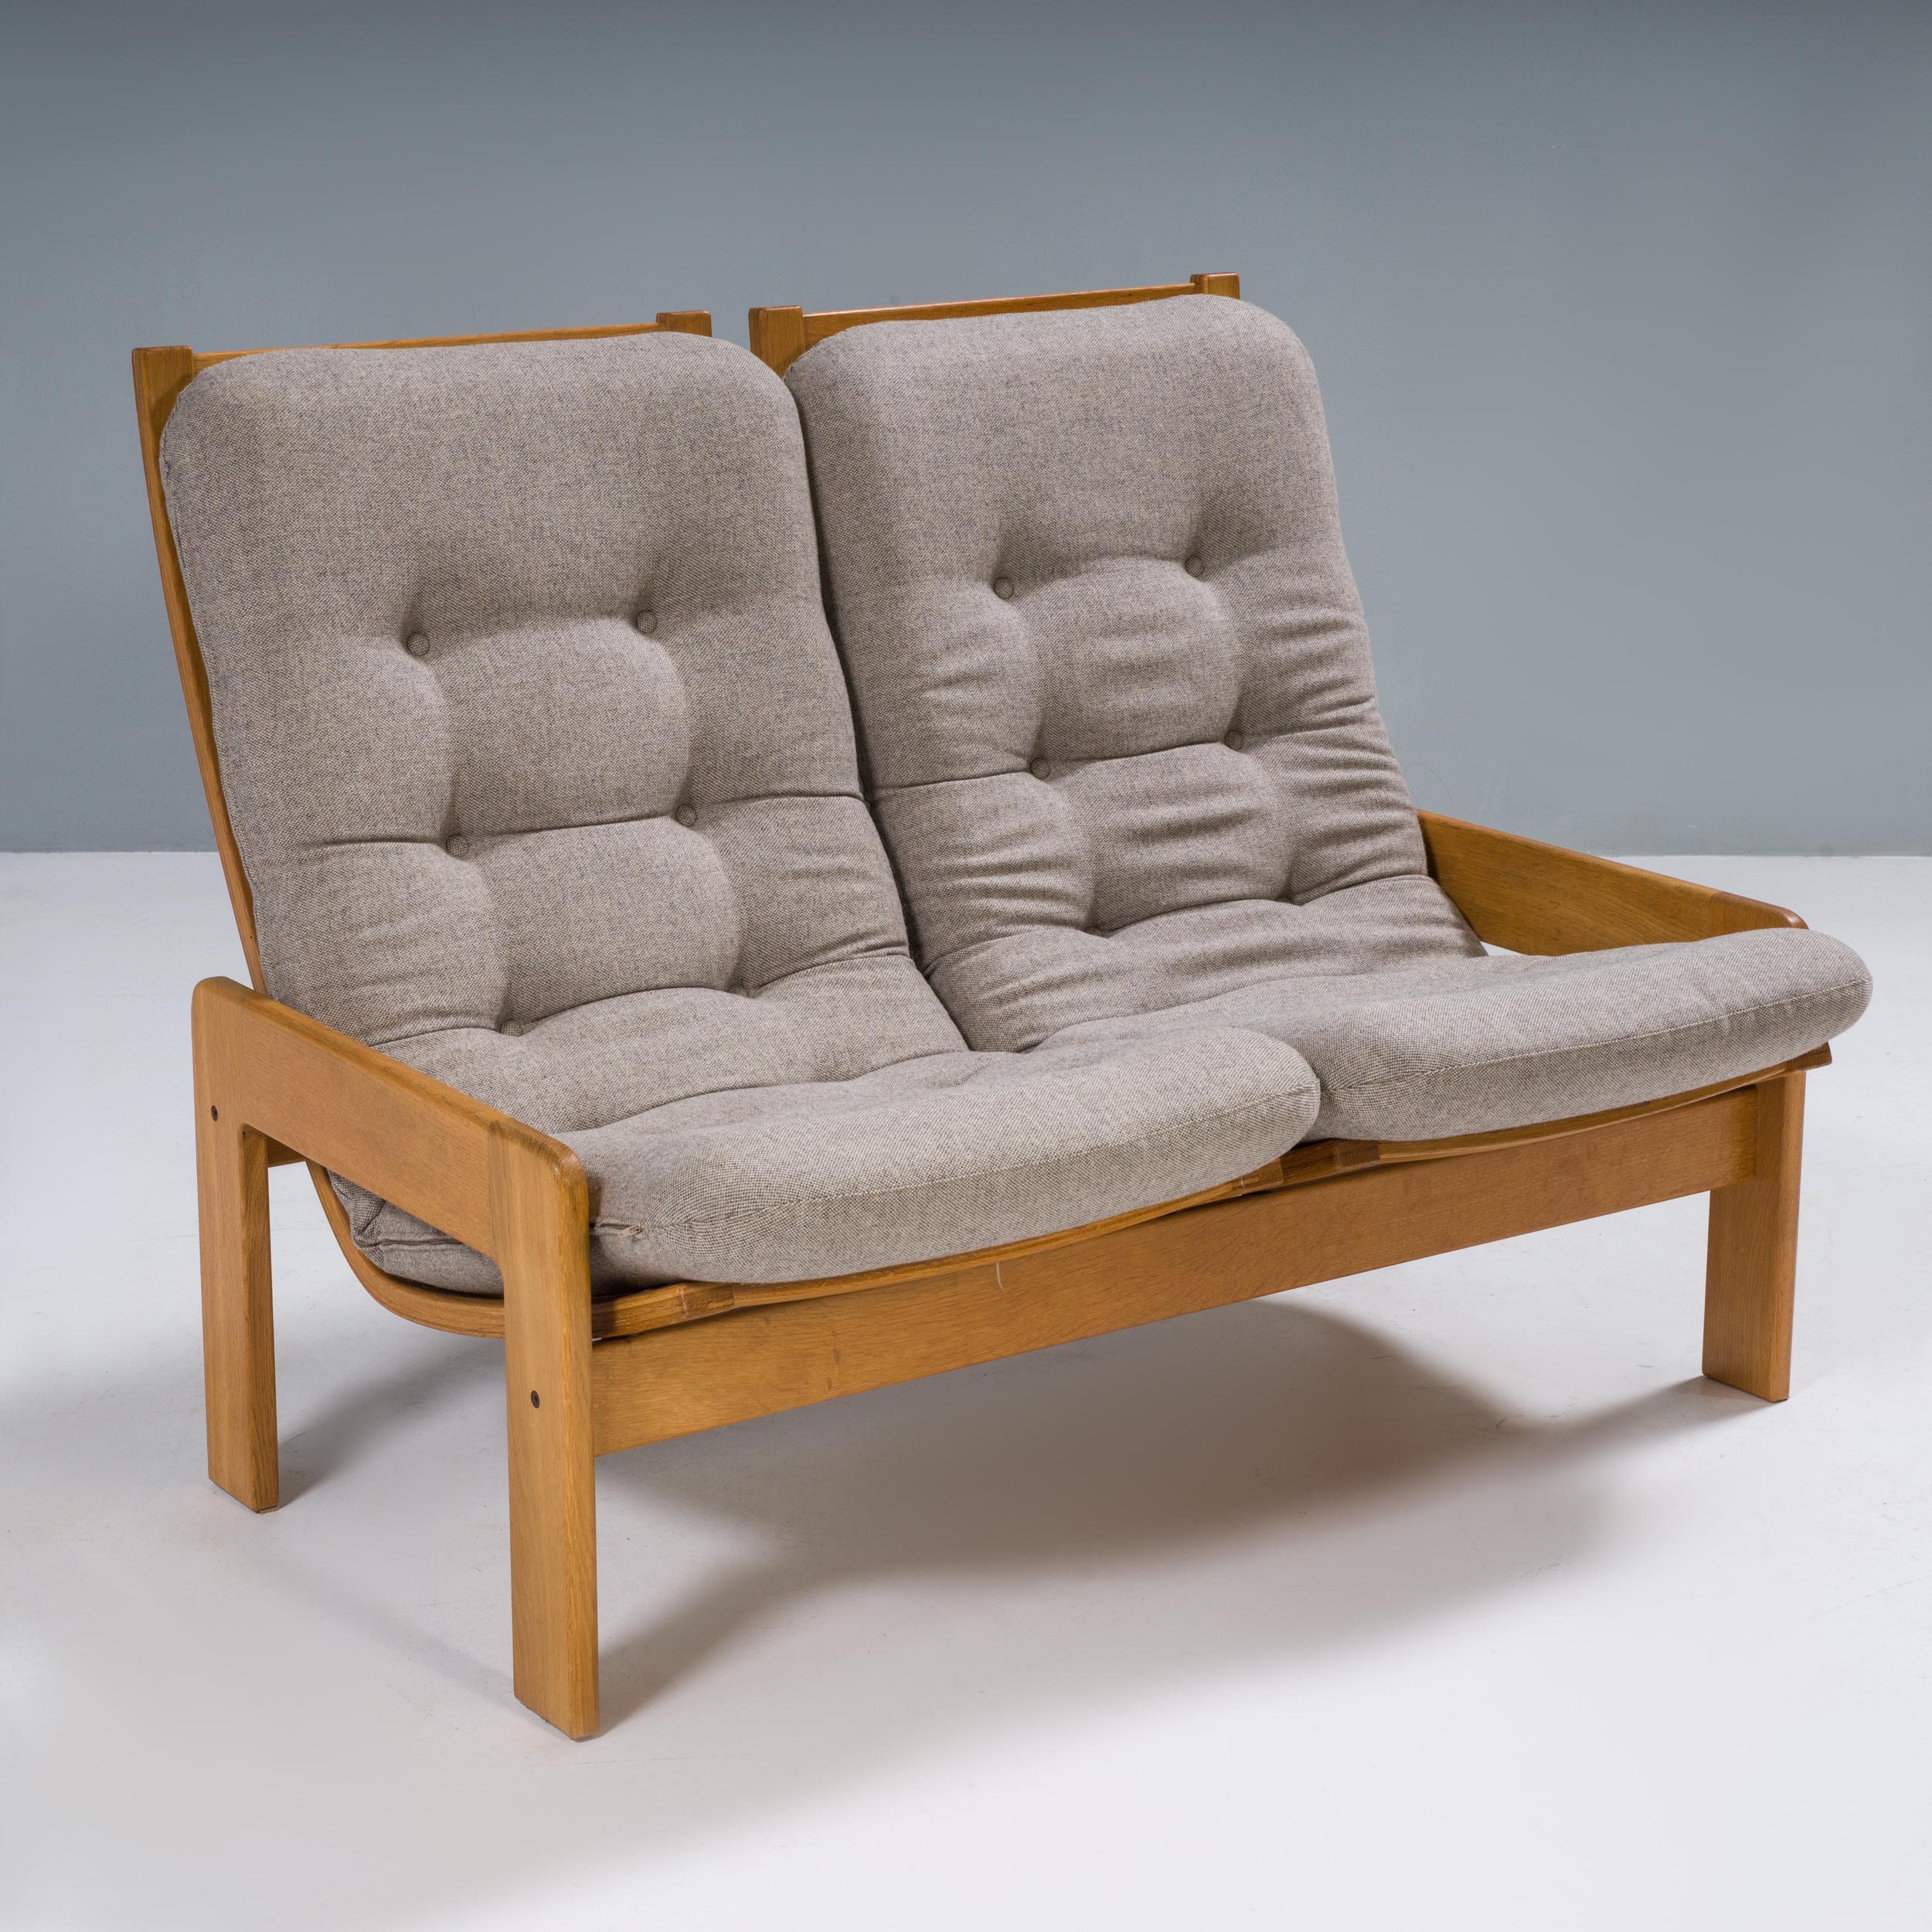 Yngve Ekström was one of the most important figures in the evolution of the Scandinavian Modernism movement and co-founder of the furniture design company Swedese.

This 2-seat sofa is constructed from a pine wood frame with sleek lines and curved